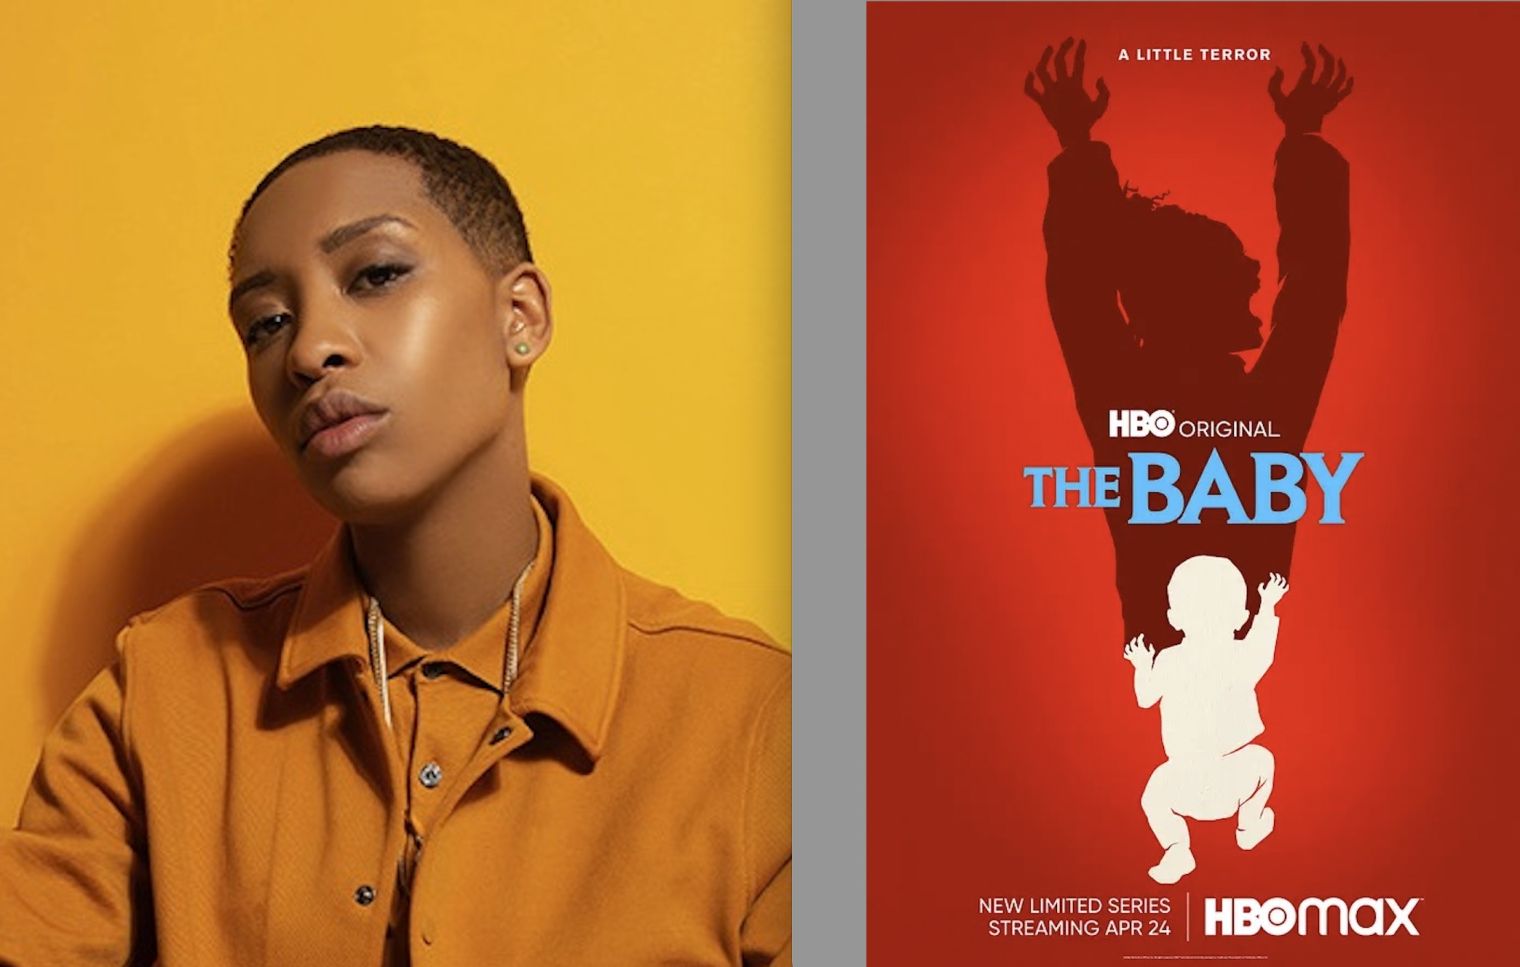 New horror comedy series The Baby, featuring Genesis Lynea, to premiere to HBO this Sunday